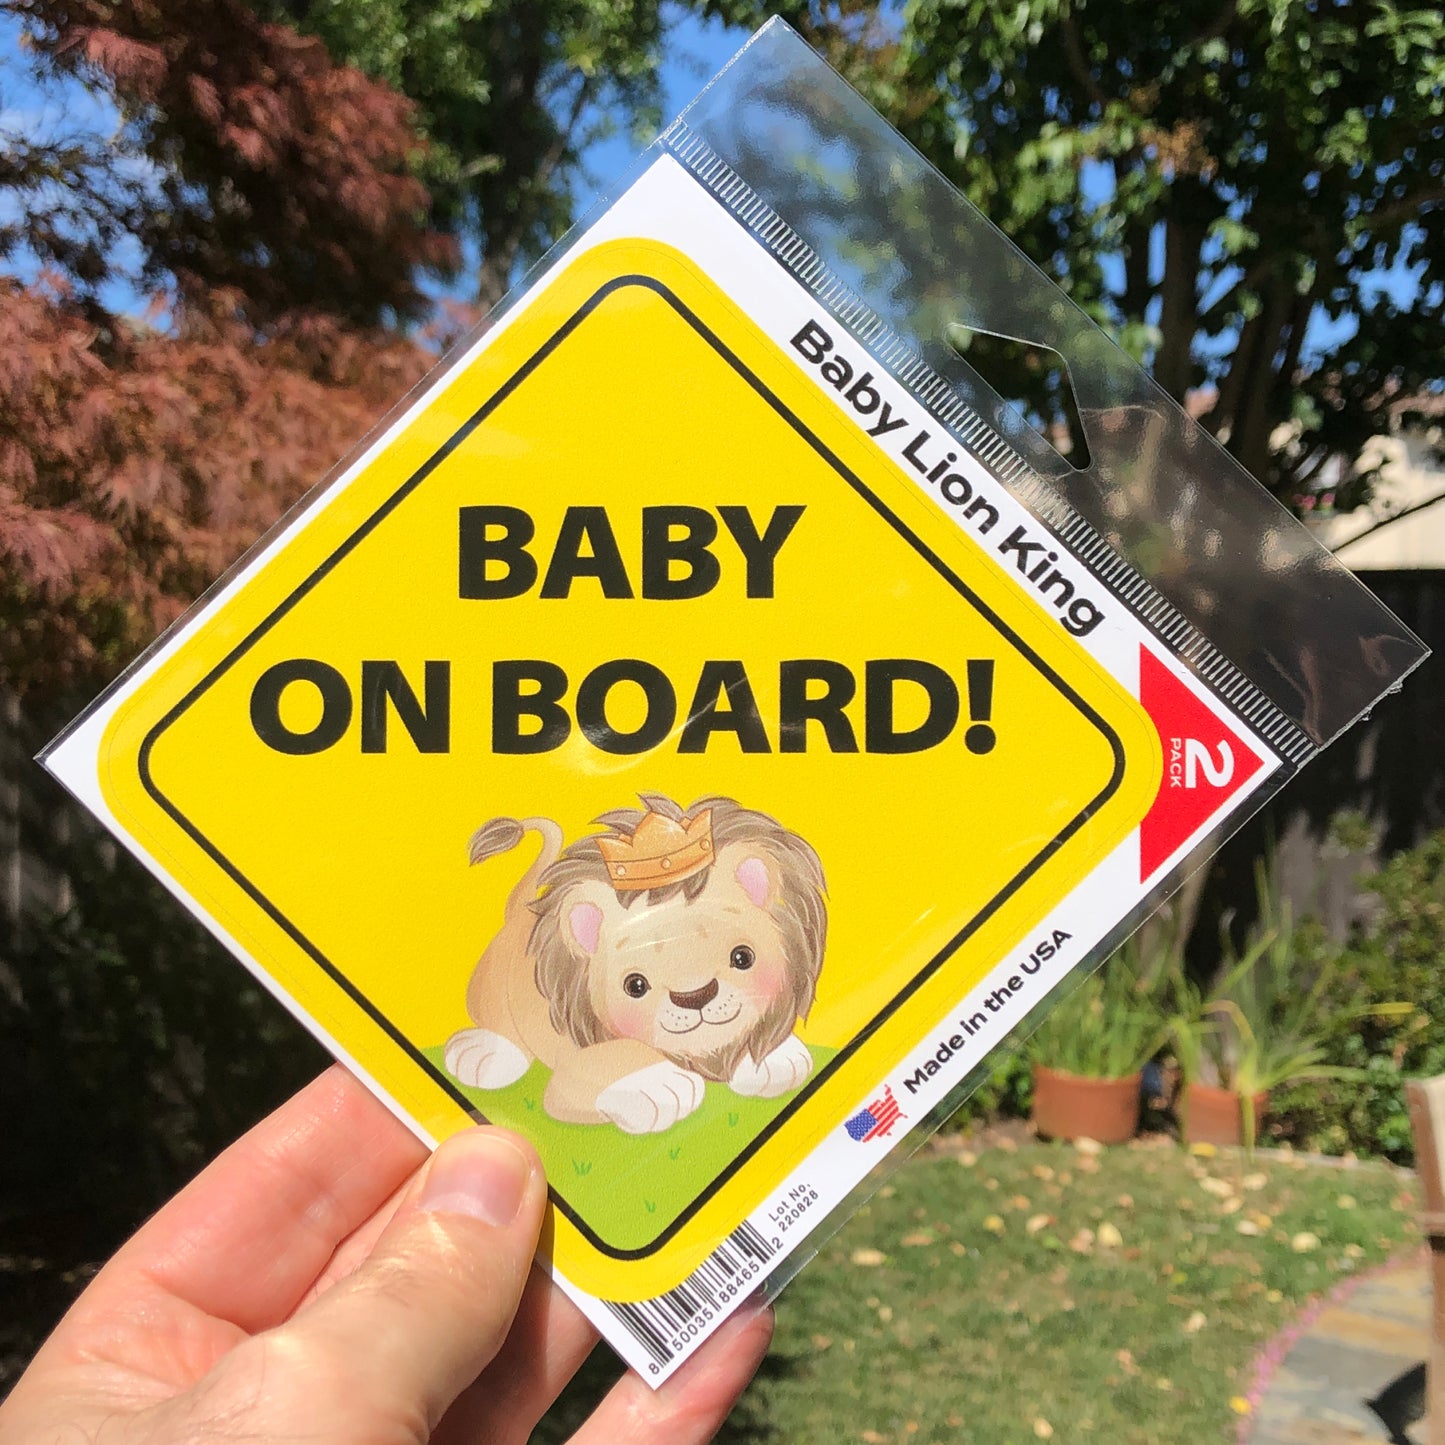 Baby On Board Baby Lion King 6